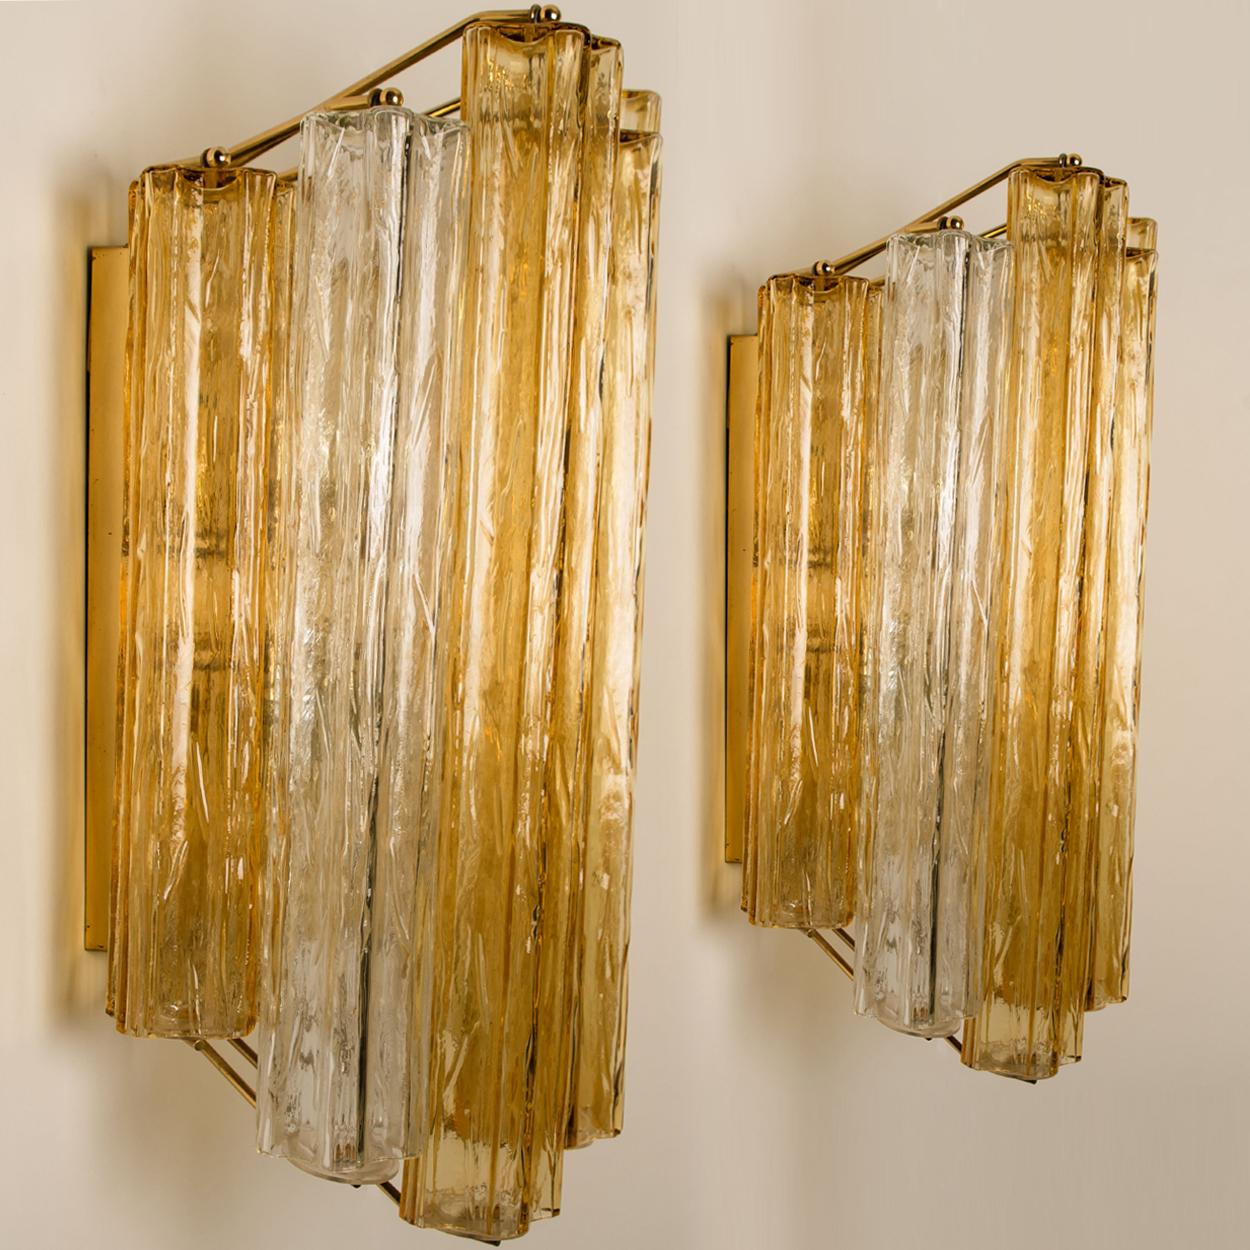 Steel 1 of the 4 Extra Large Wall Sconces or Wall Lights Murano Glass, Barovier & Toso